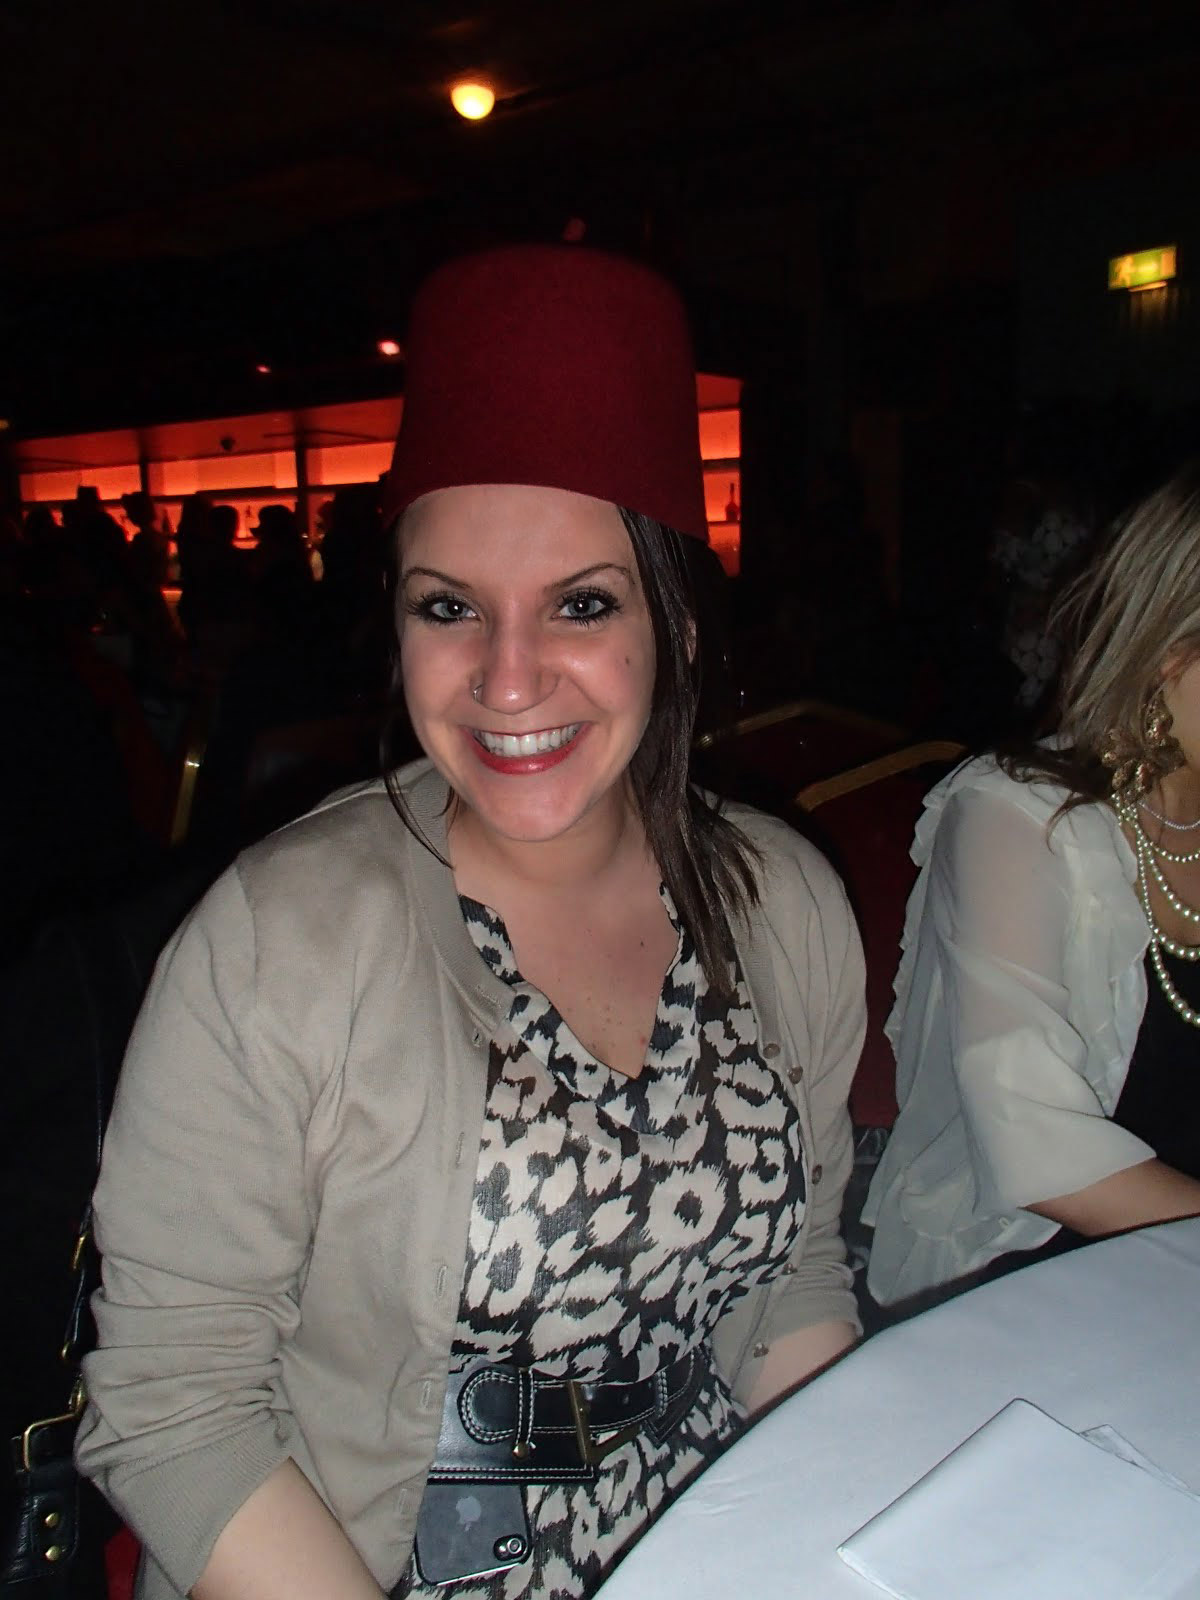 Me in a fez